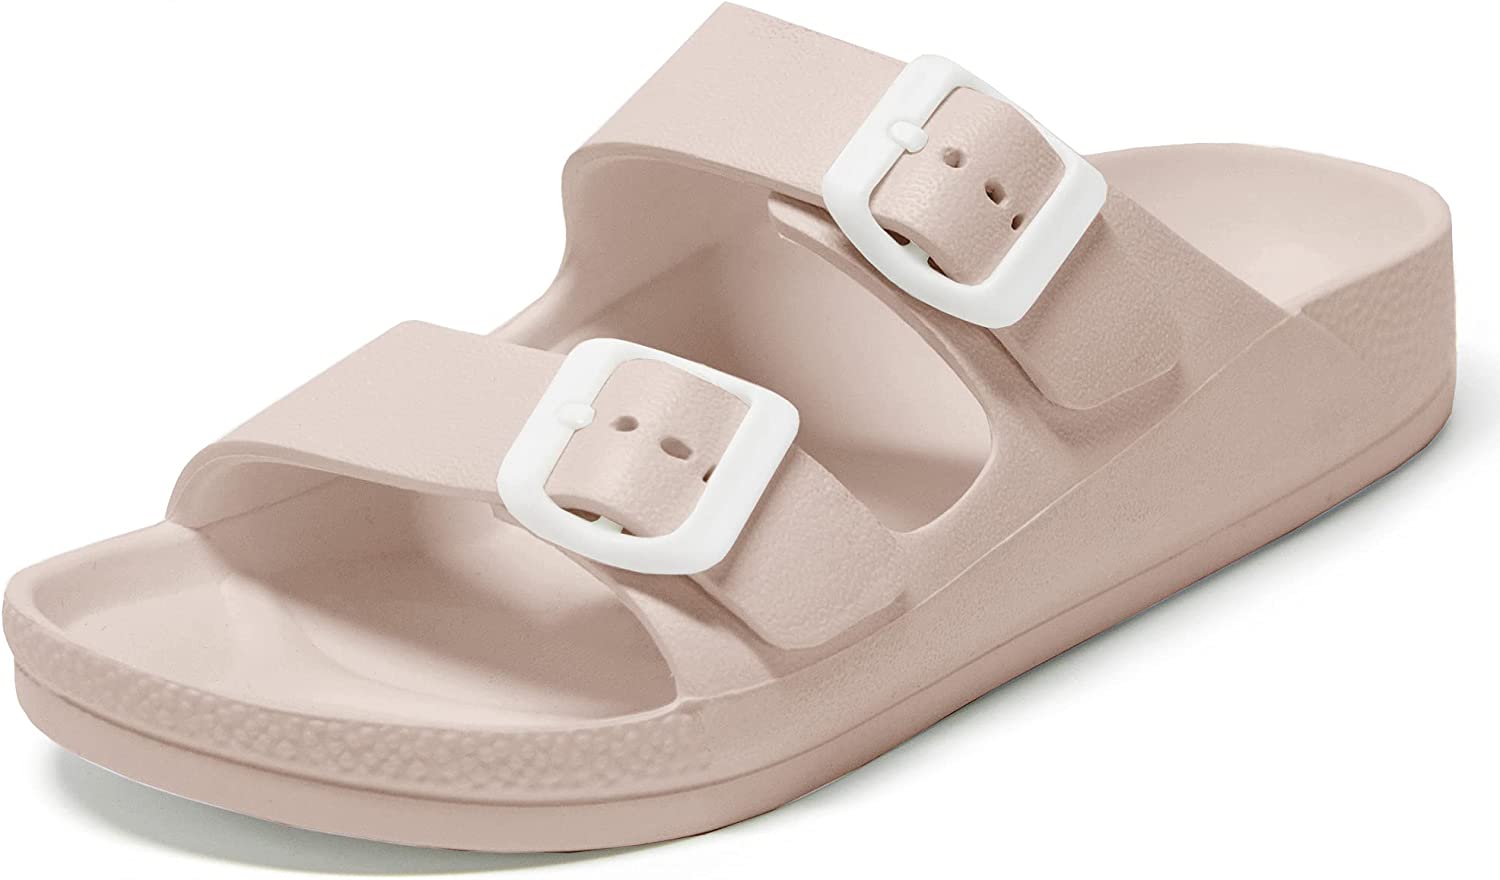 Double Buckle Sandals Womens